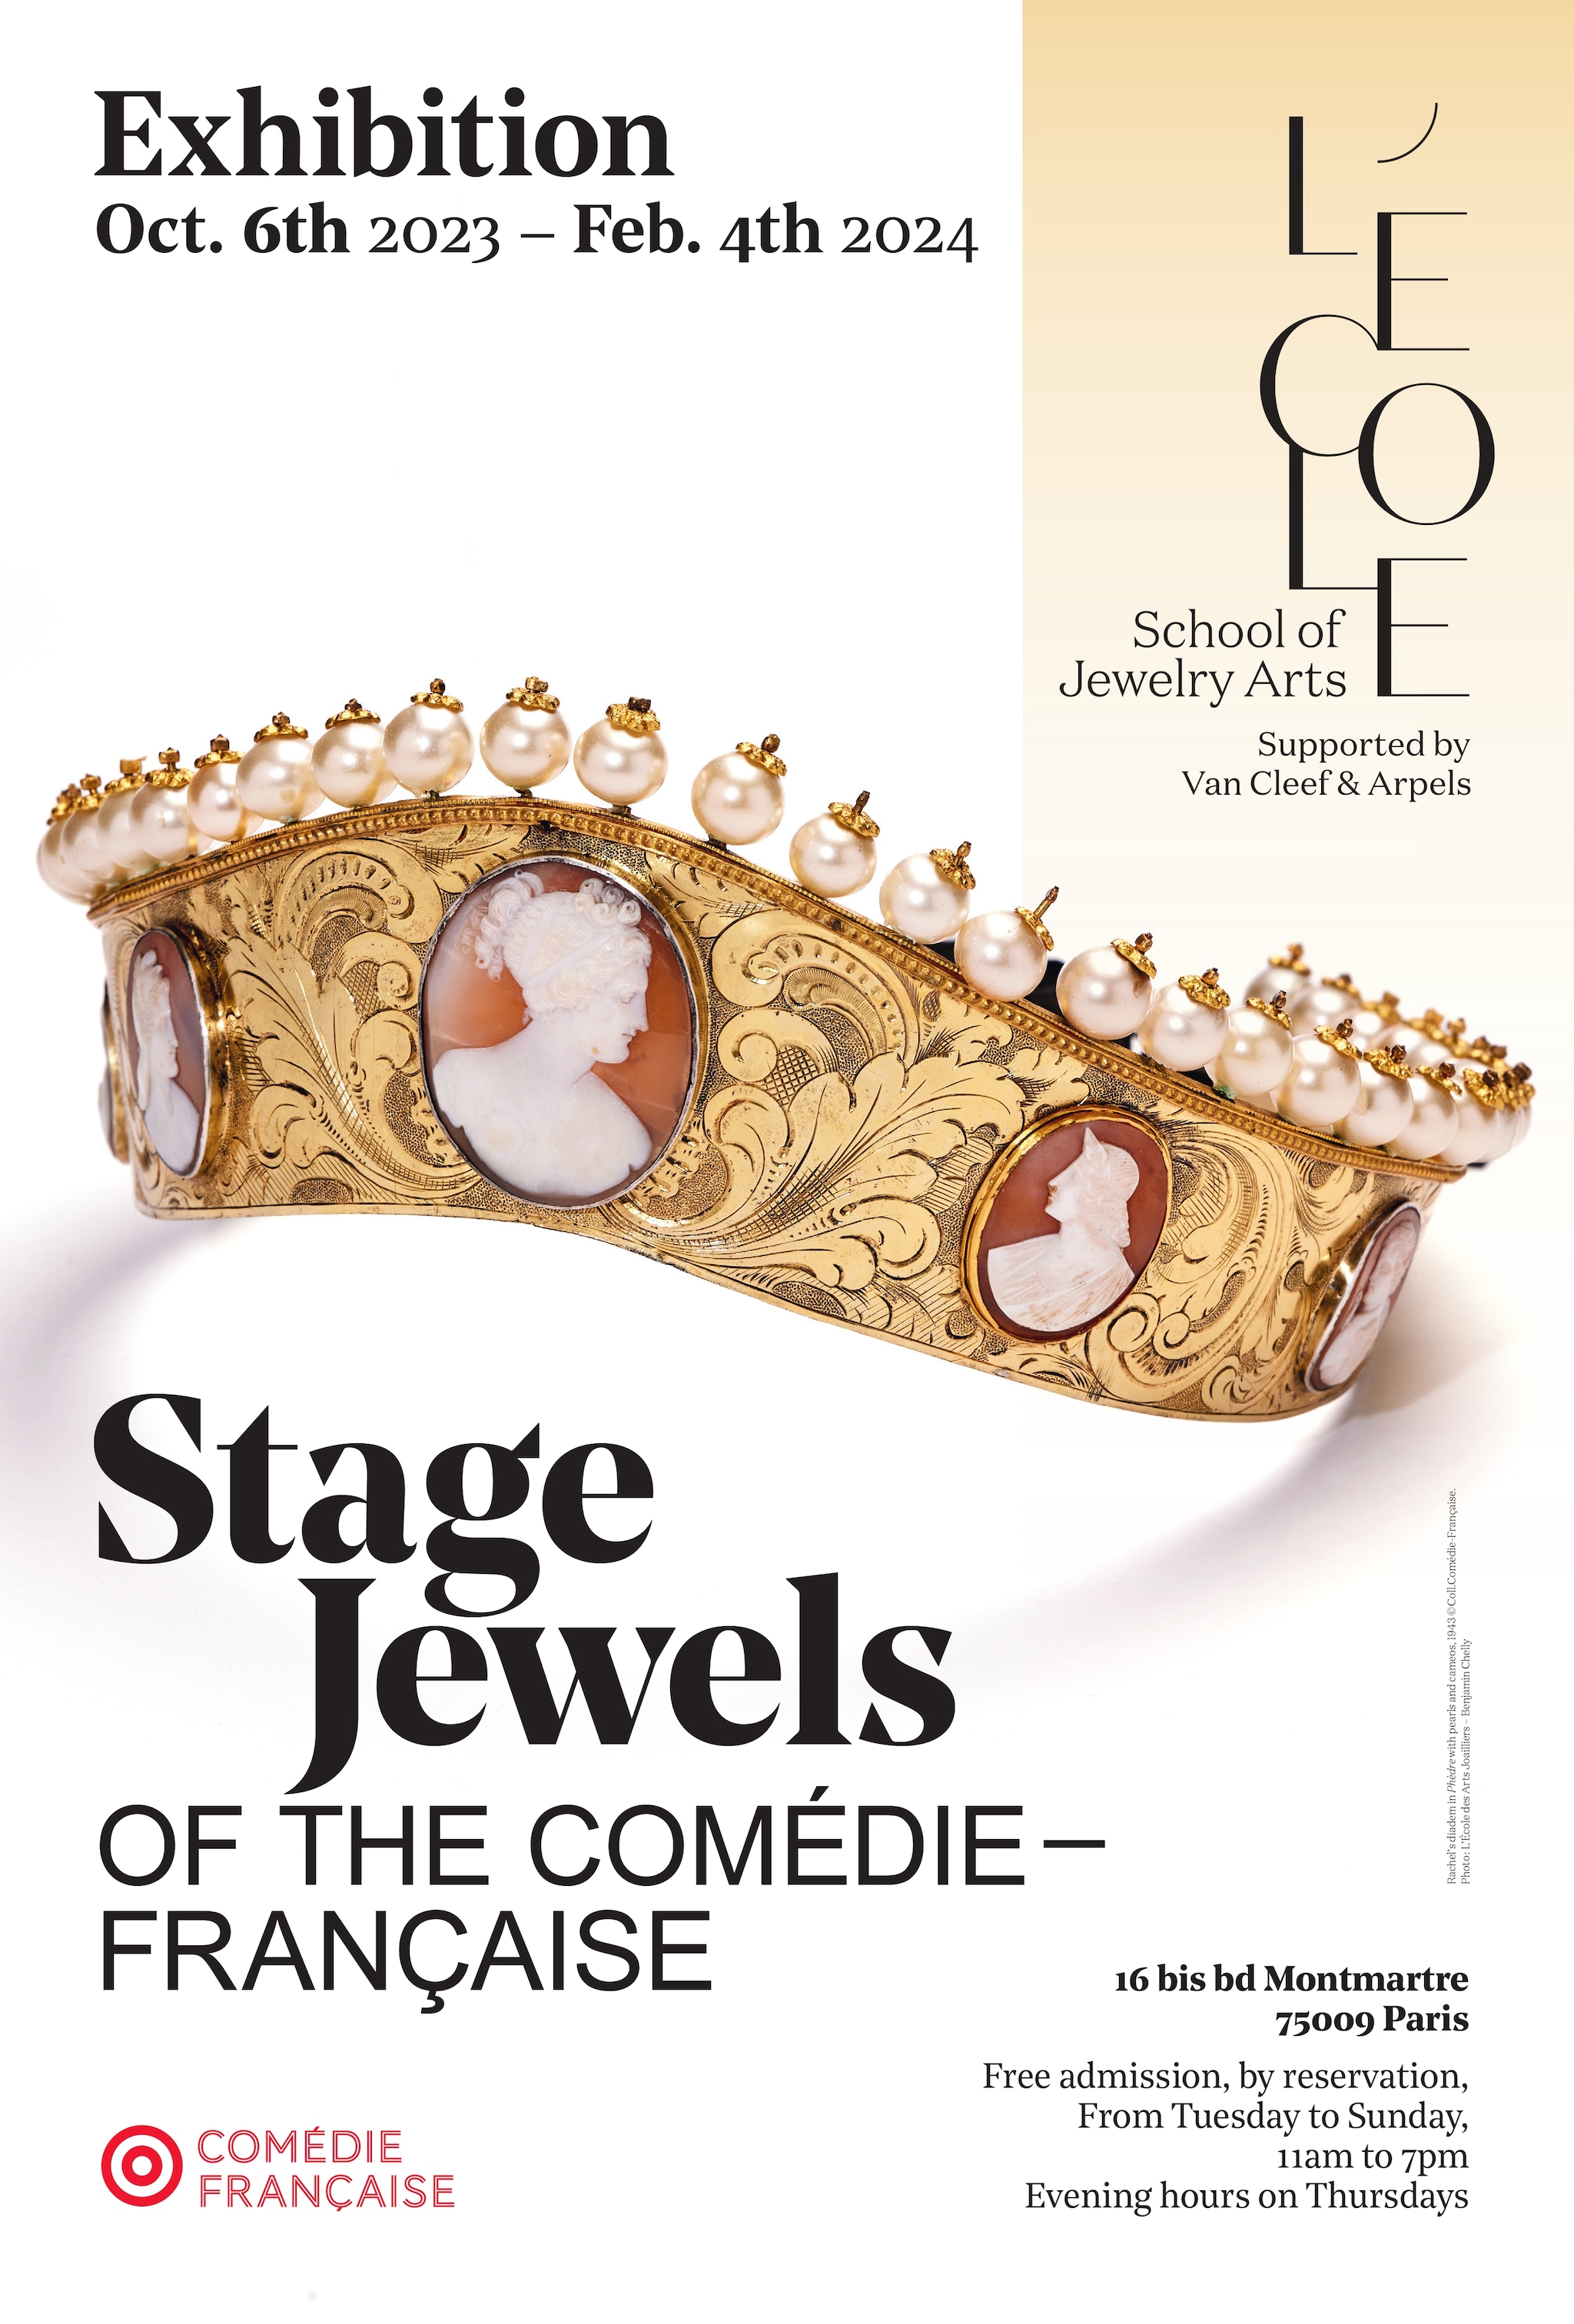 Stage Jewels of the Comédie-Française - Exhibition poster